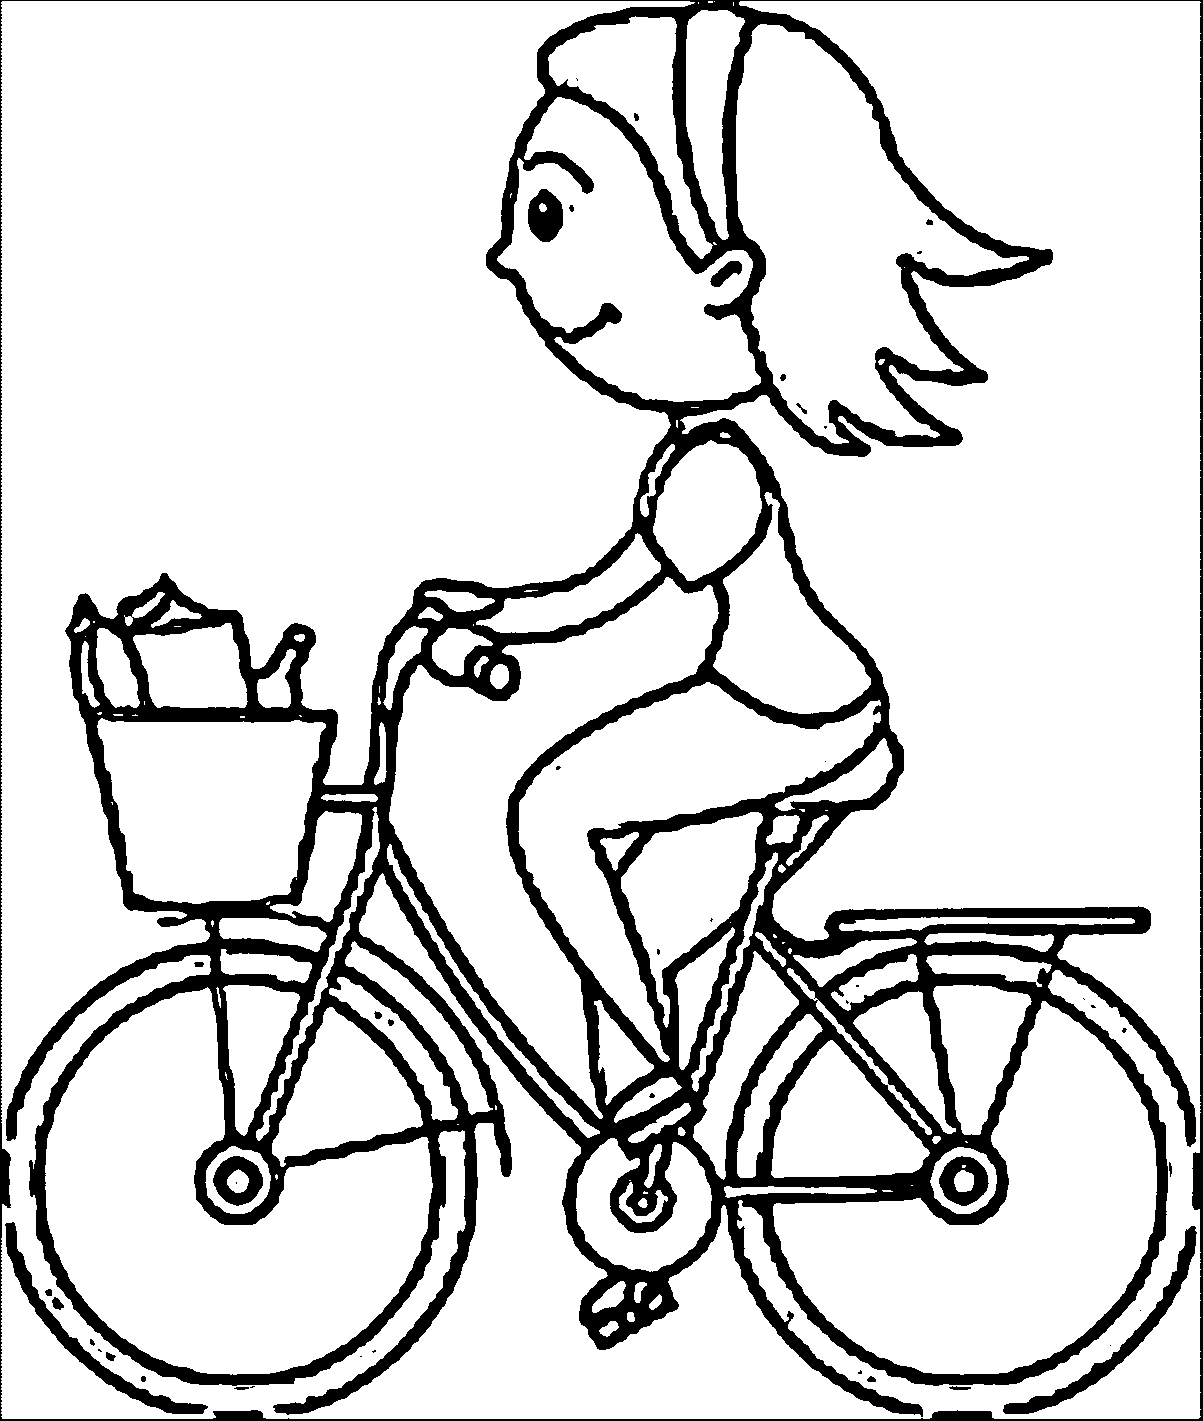 bike coloring pages bike riding coloring page coloring home bike coloring pages 